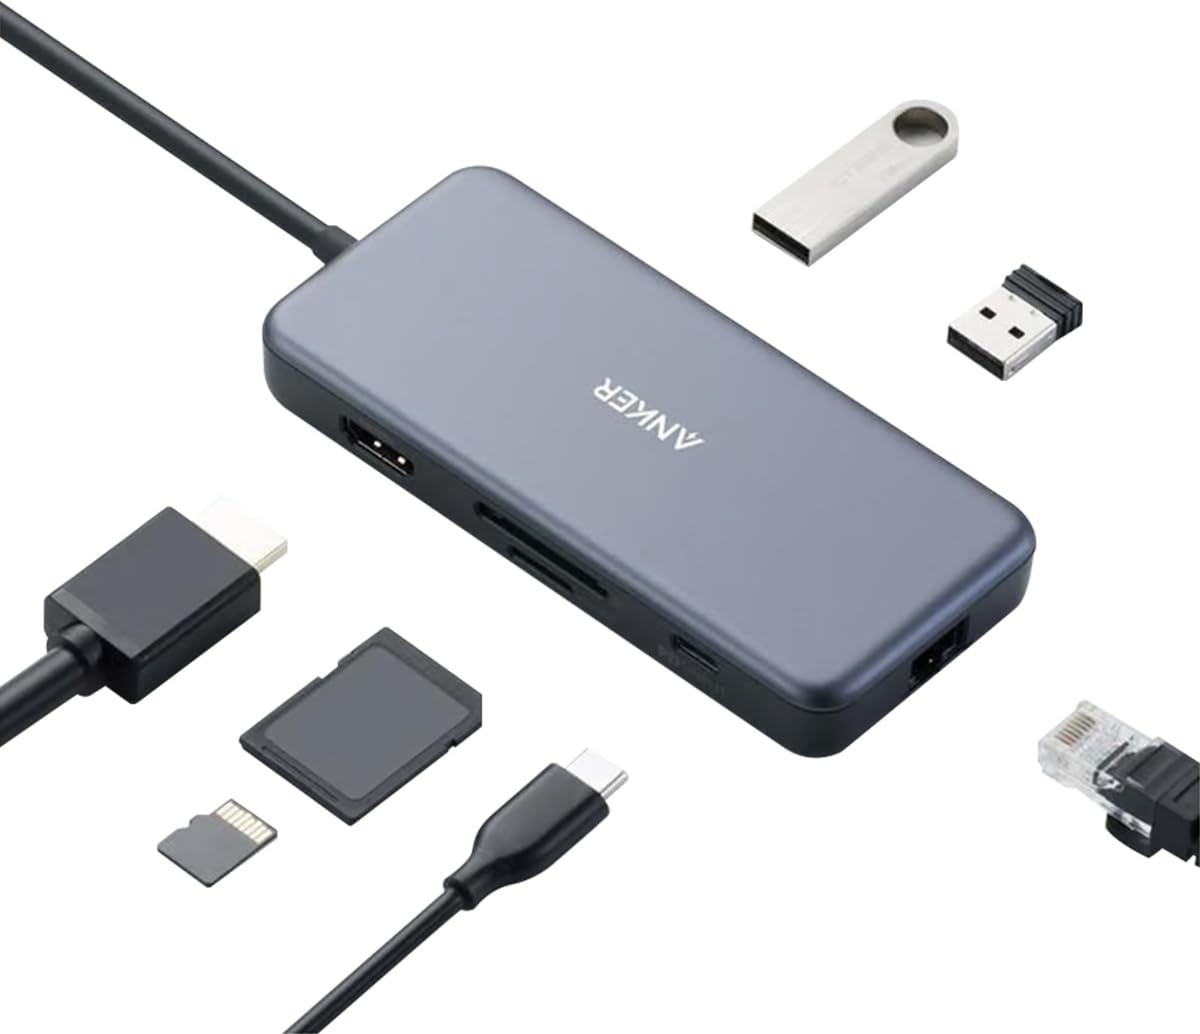 Anker USB C Hub Adapter, PowerExpand+ 7-in-1 USB C Hub, with 4K USB C to HDMI, 60W Power Delivery, 1Gbps Ethernet, 2 USB 3.0 Ports, SD and microSD Card Readers, for MacBook Pro and Other USB C Laptops